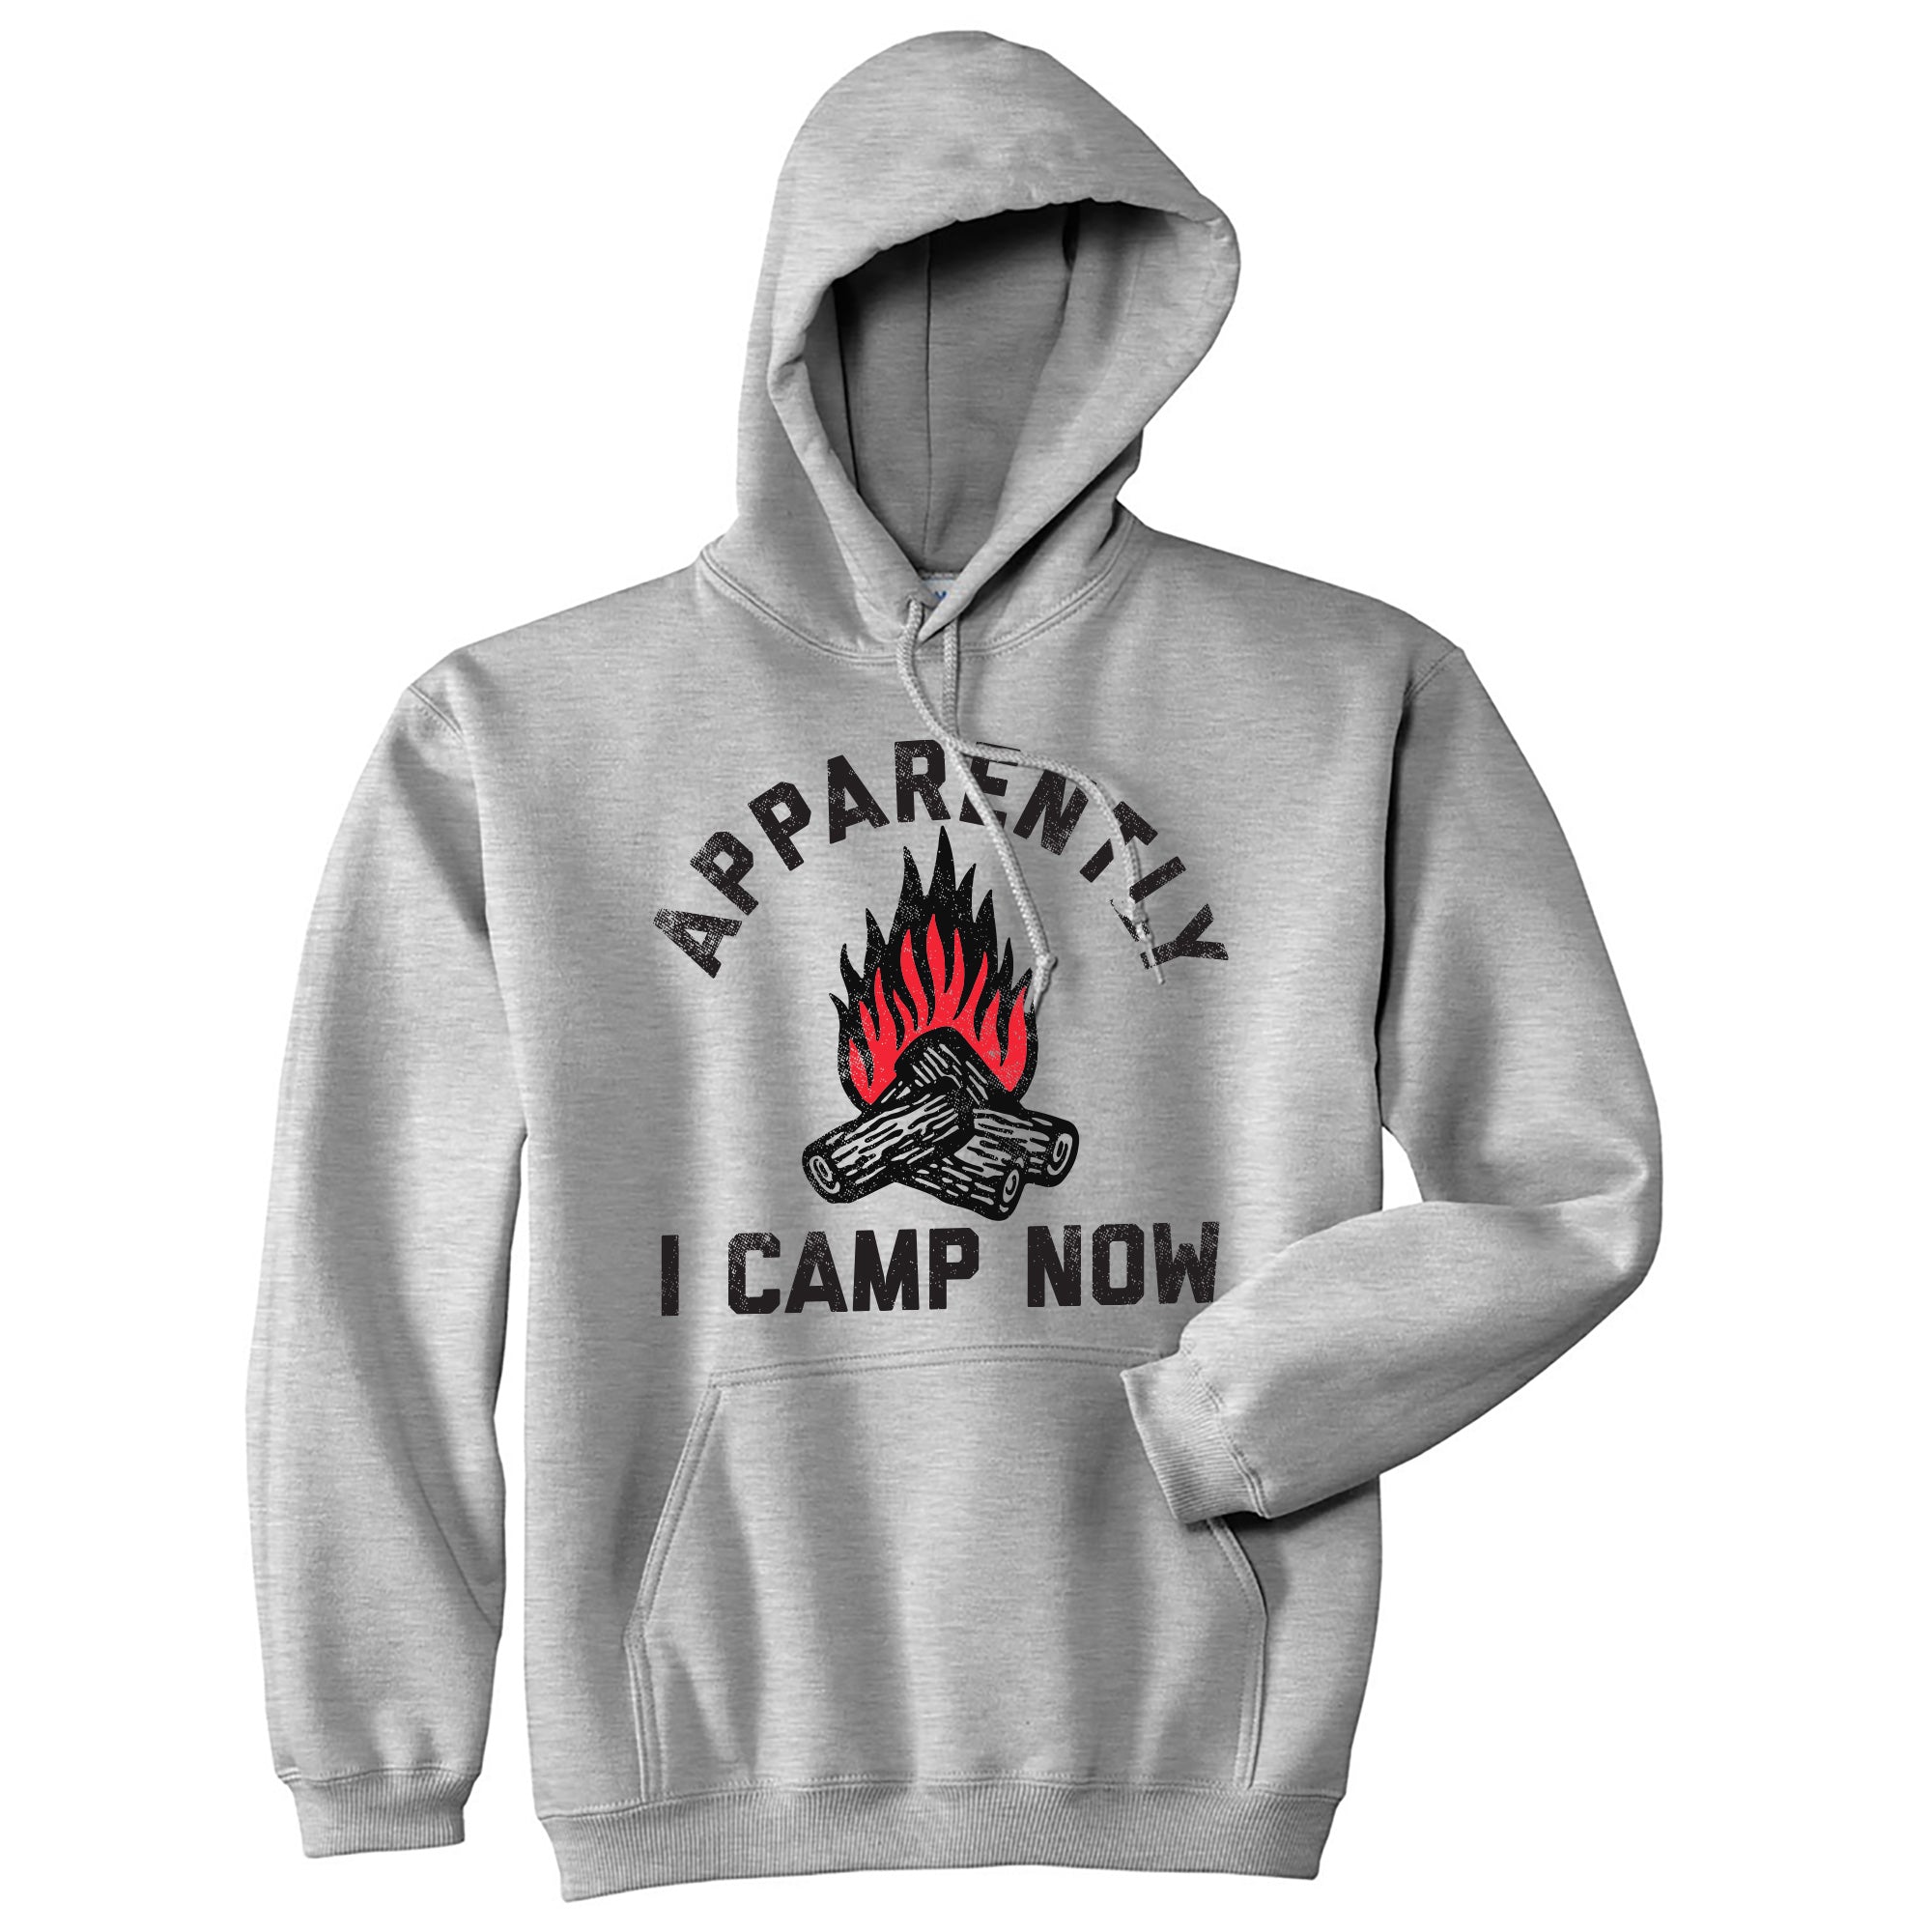 Funny Light Heather Grey - I Camp Now Apparently I Camp Now Hoodie Nerdy Camping sarcastic Tee